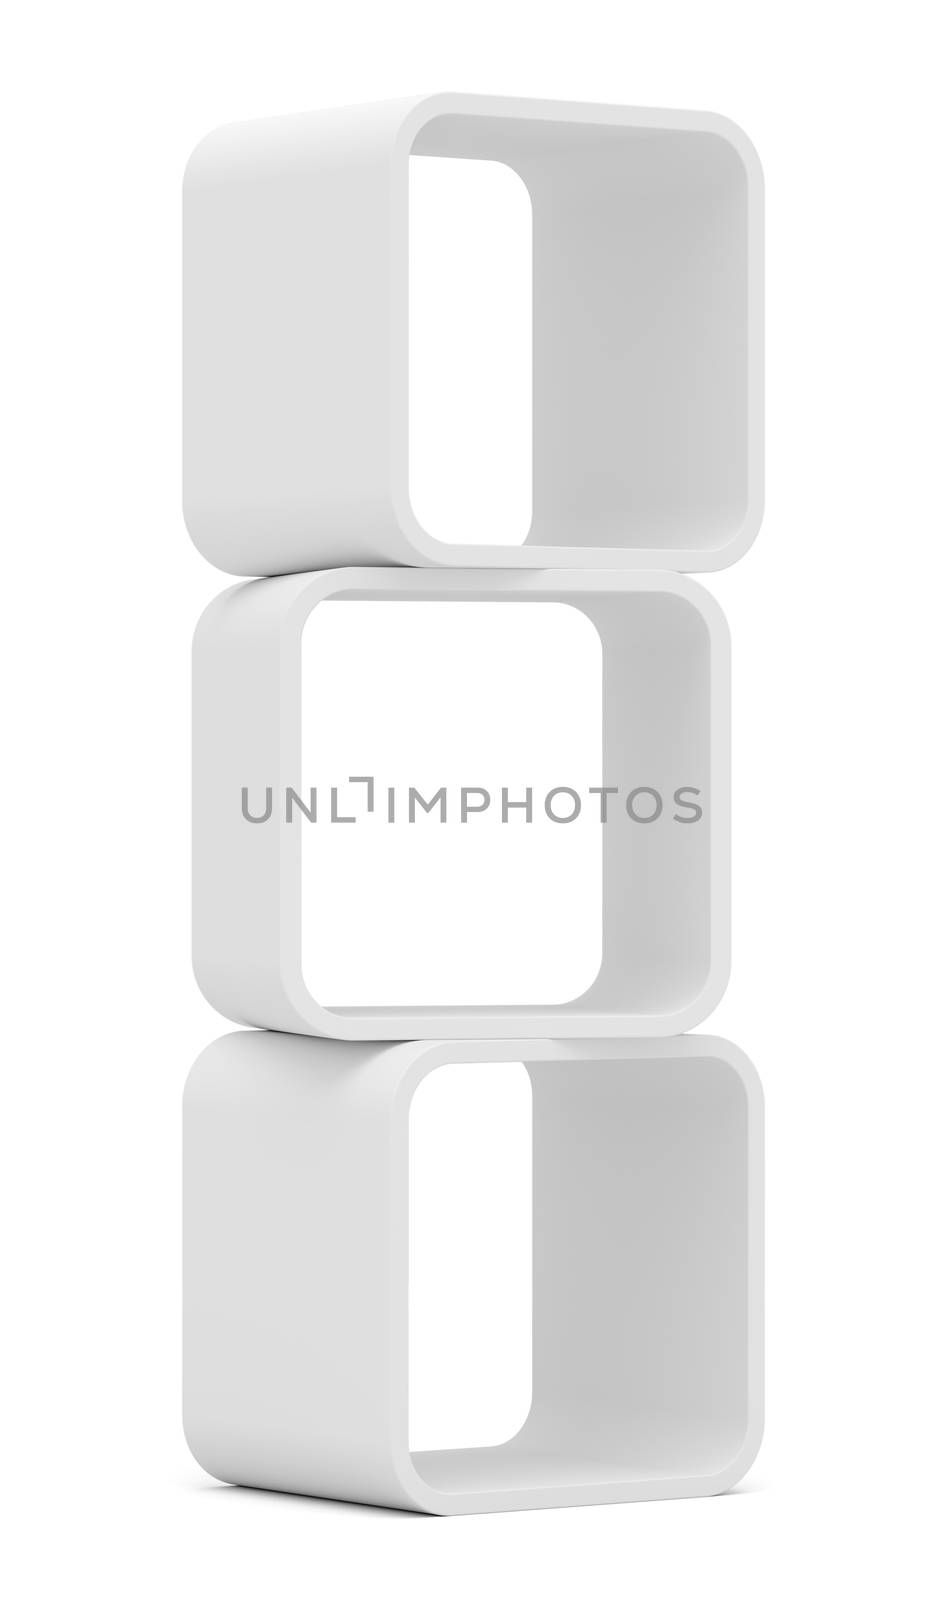 Empty white rounded showcase. Isolated on white. Mock-up. Template shelves. 3D rendering